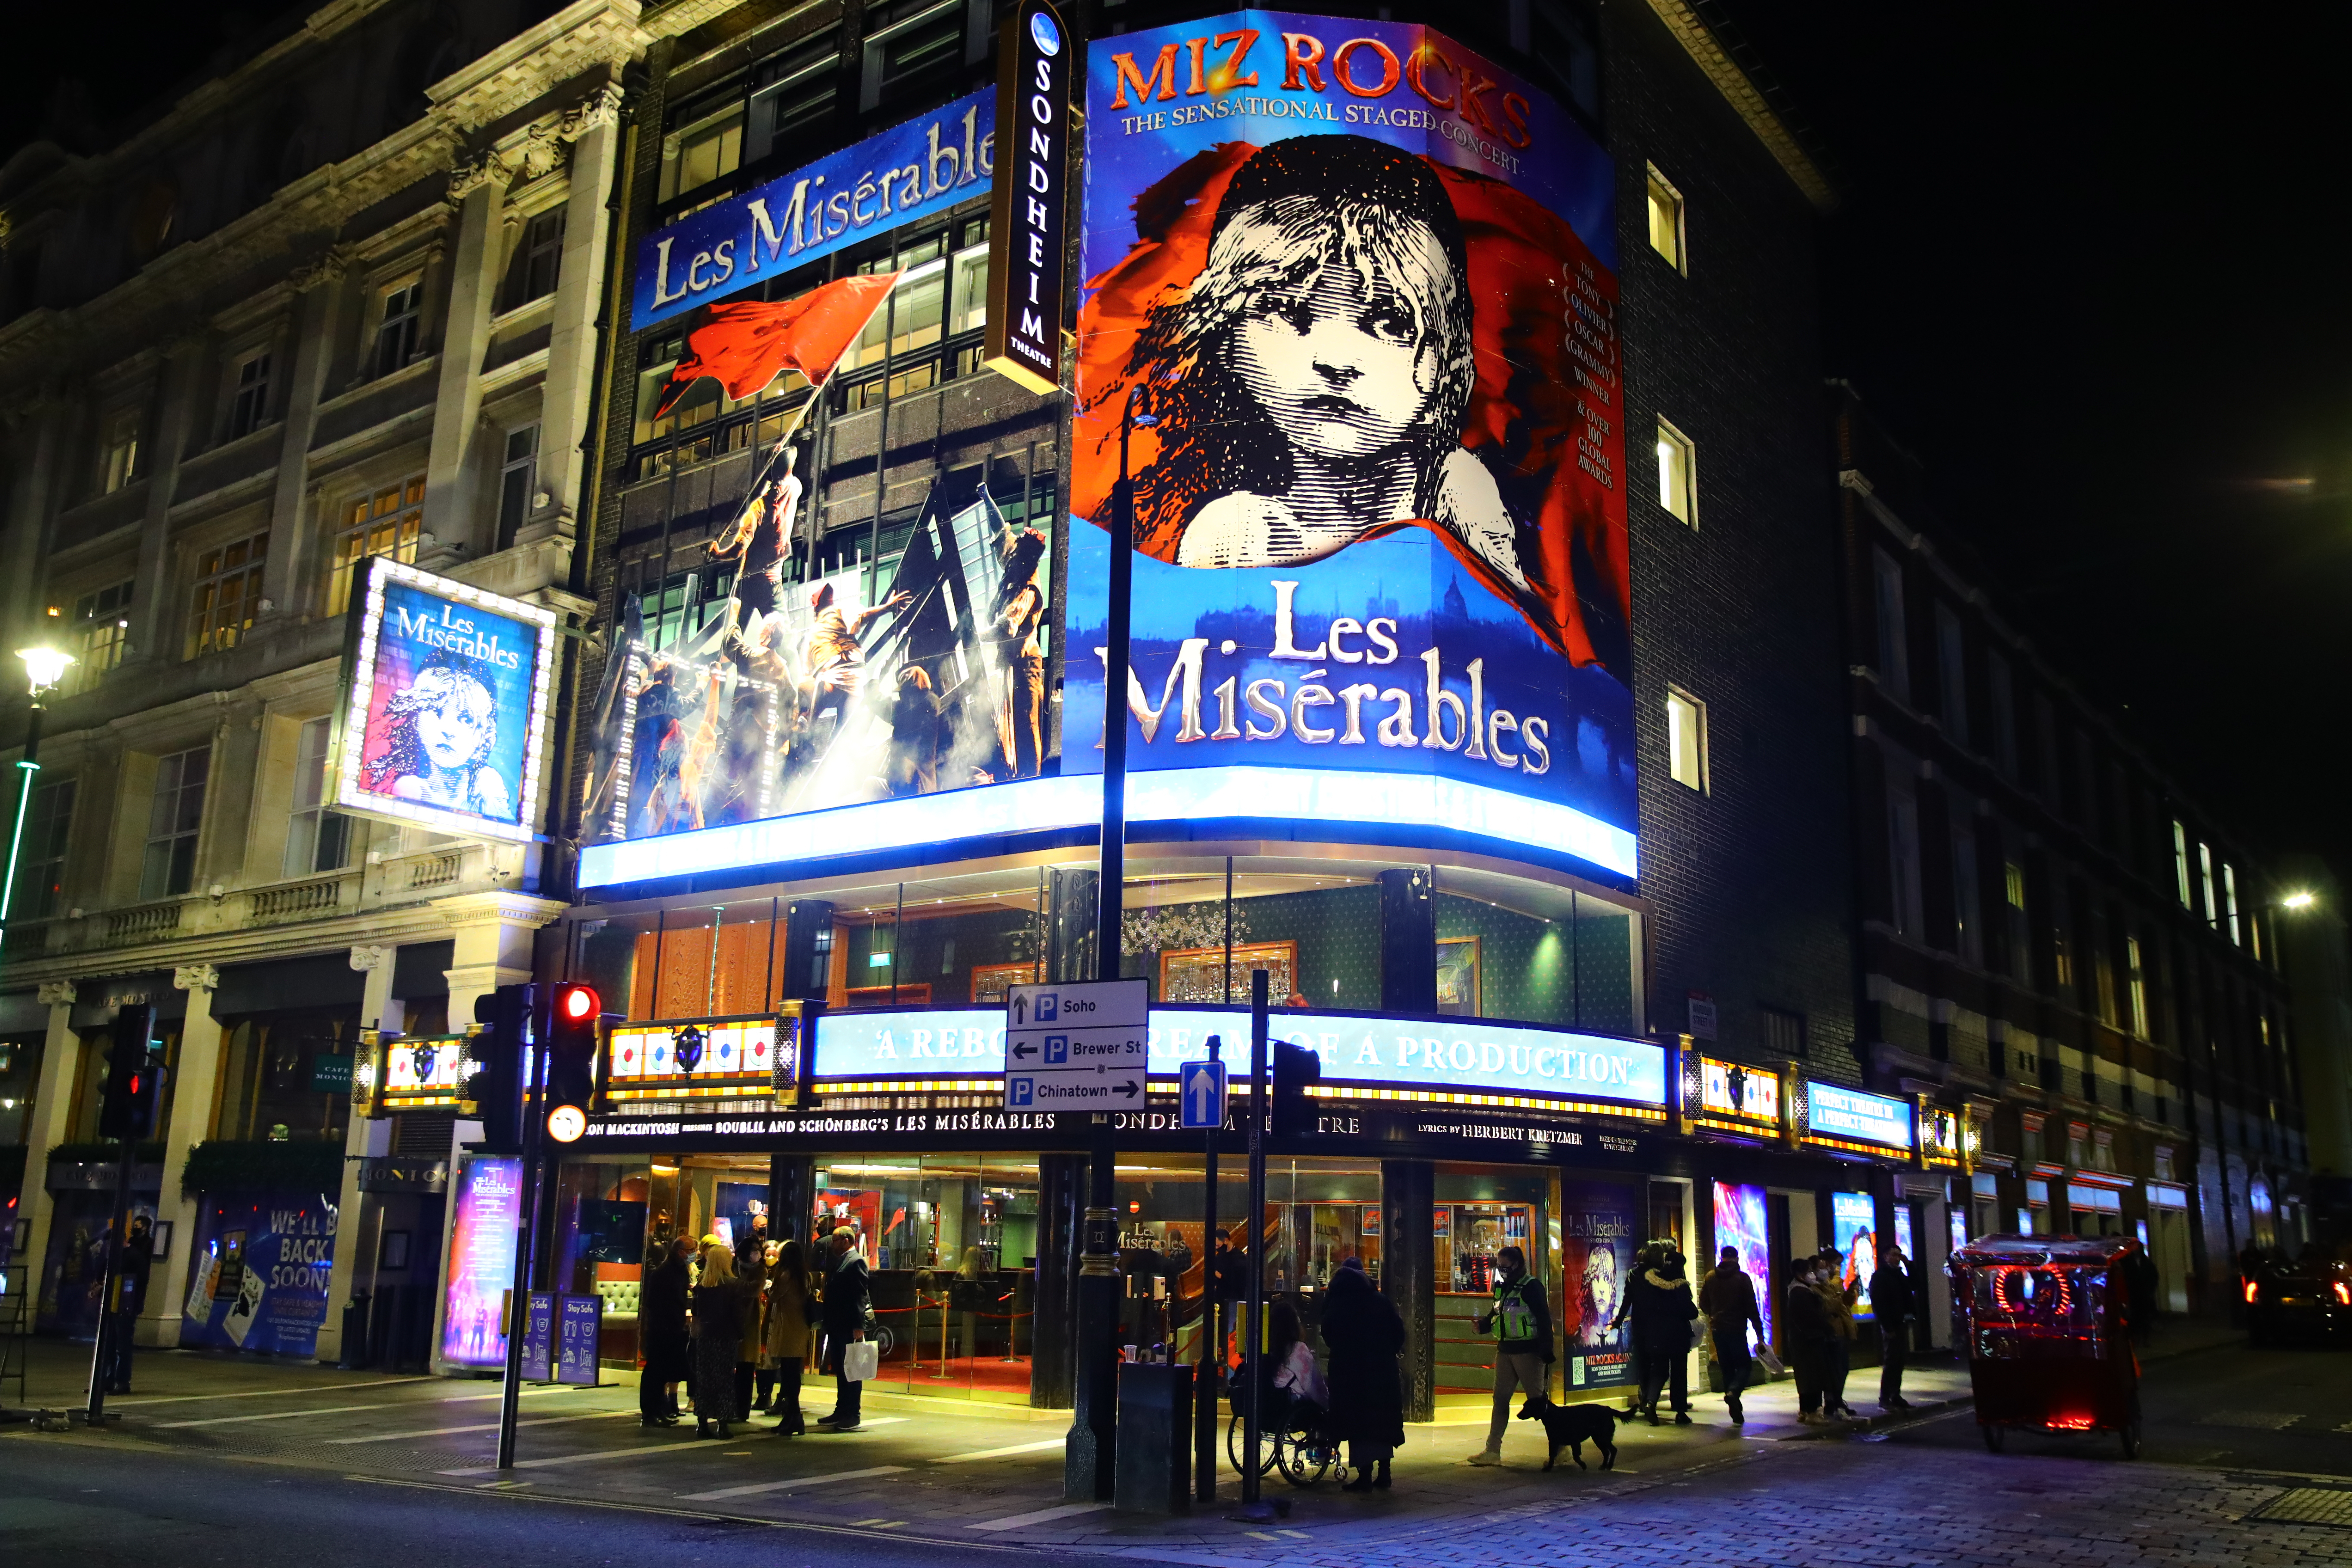 The lit marquee for the Broadway show “Les Miserables.”